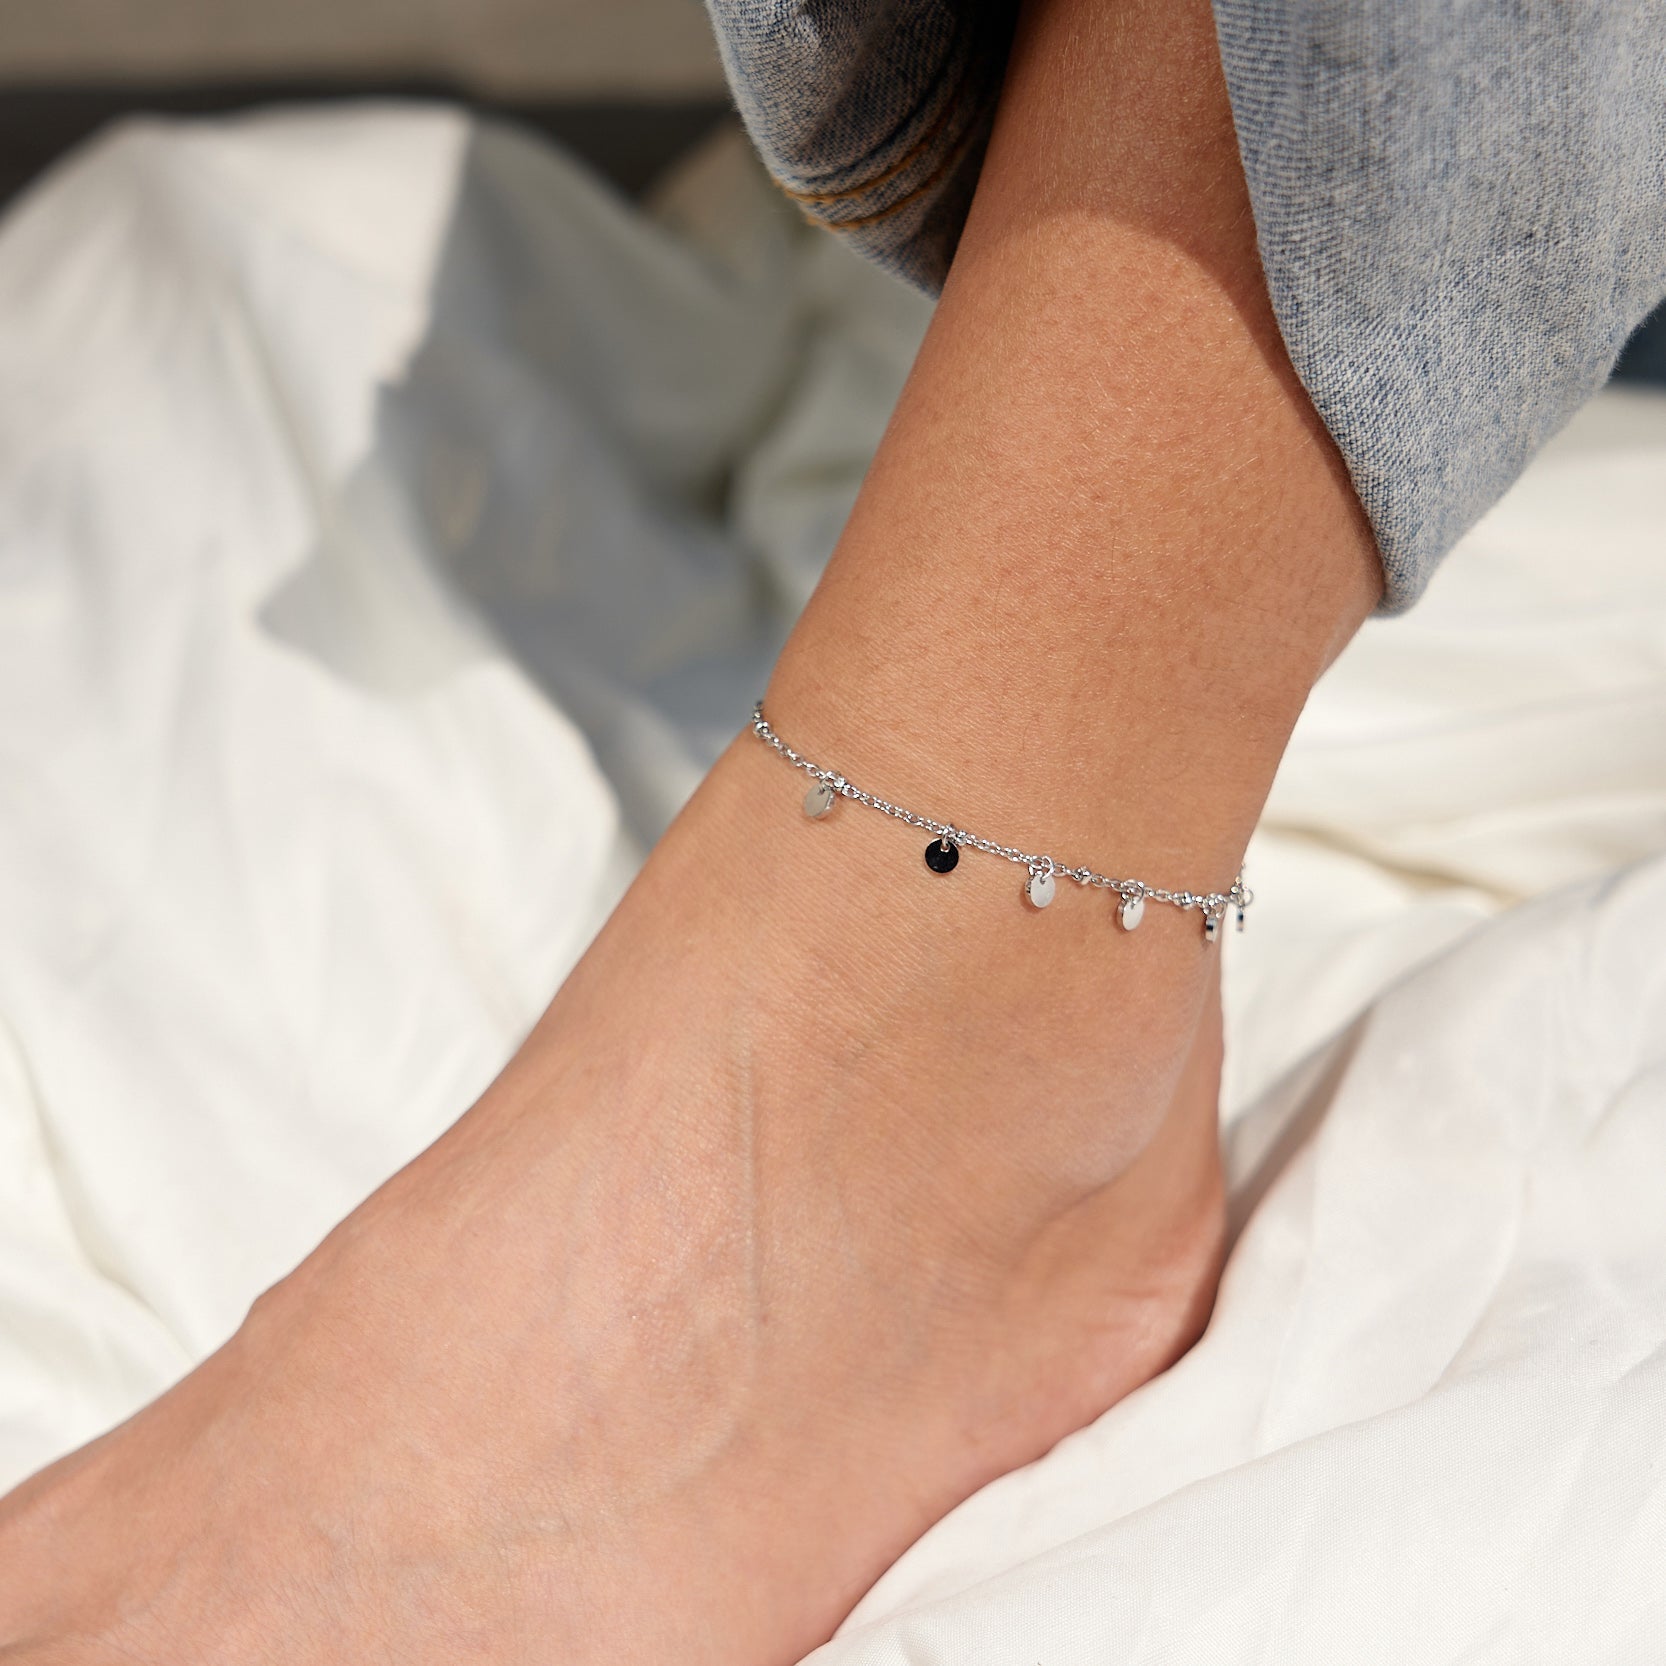 Dangling Disks Anklet - Flaire & Co.